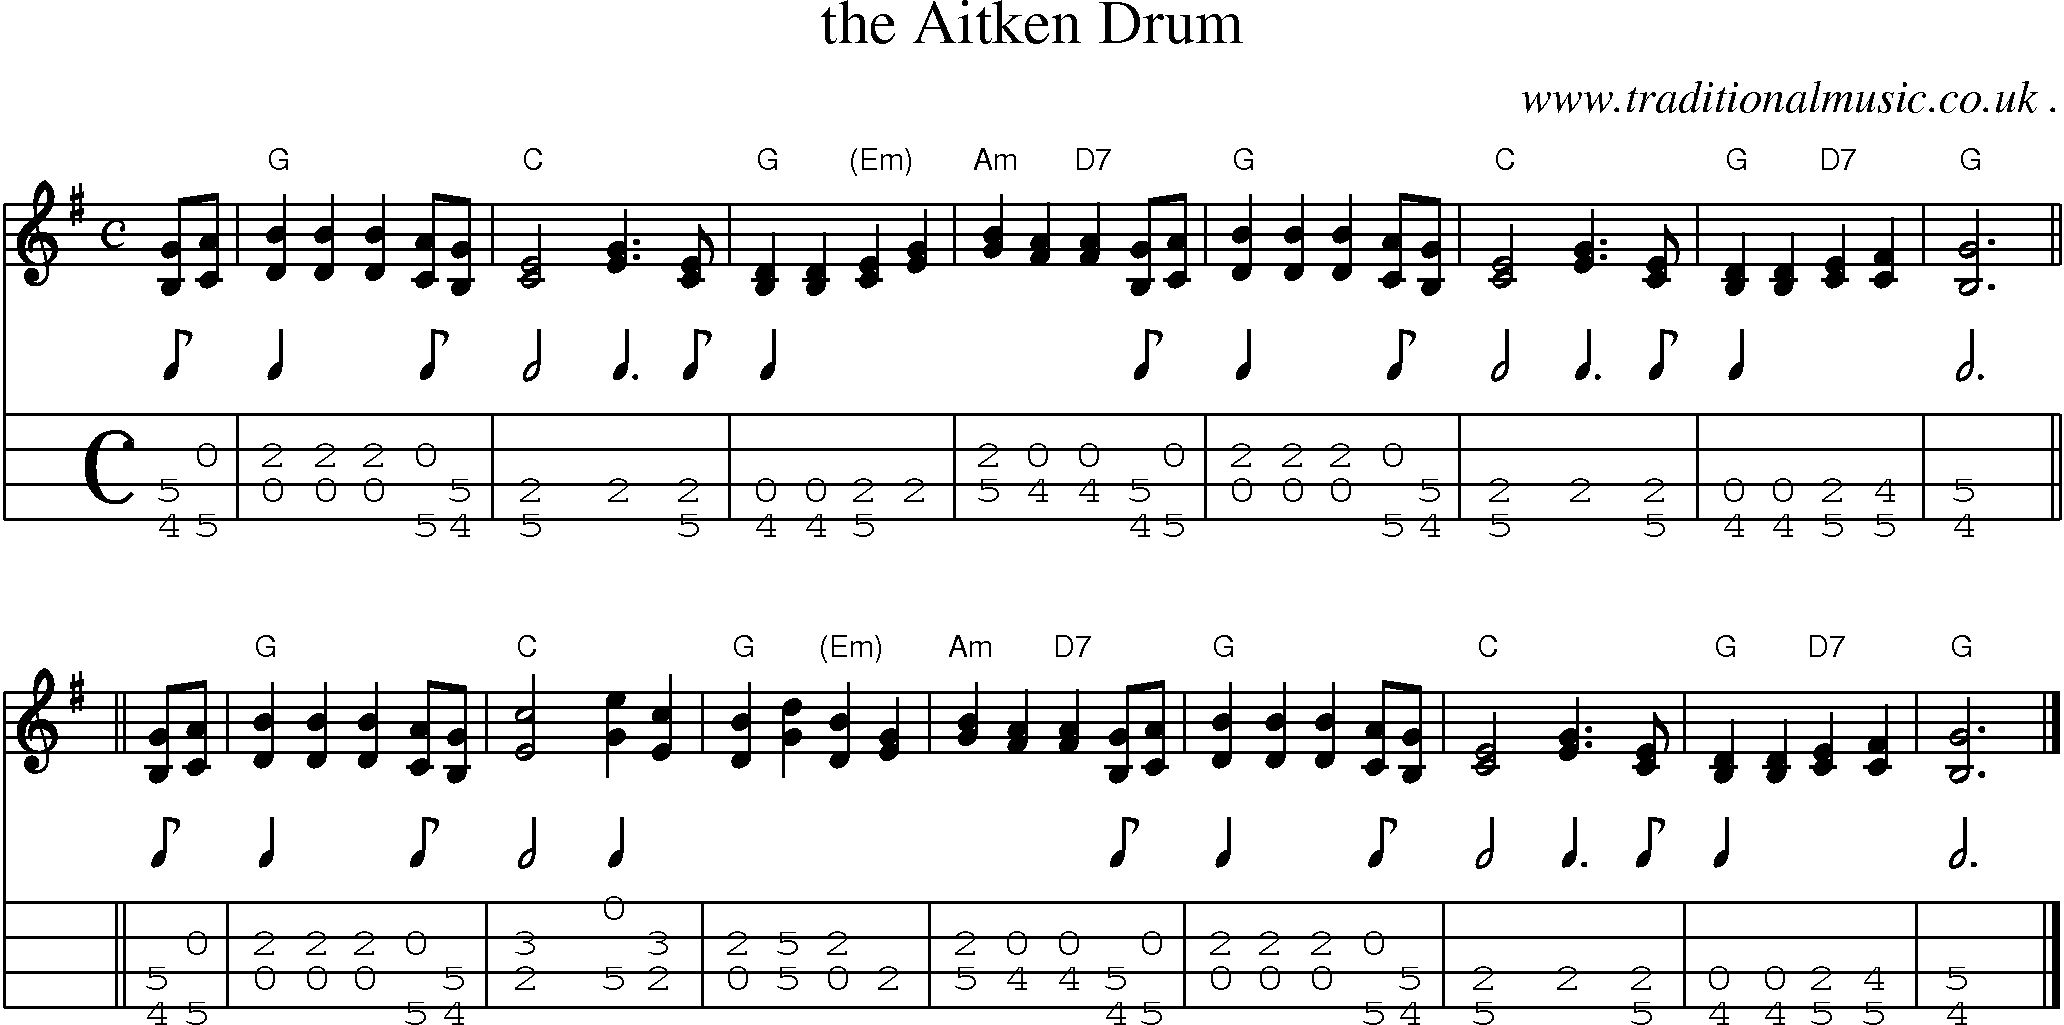 Sheet-music  score, Chords and Mandolin Tabs for The Aitken Drum